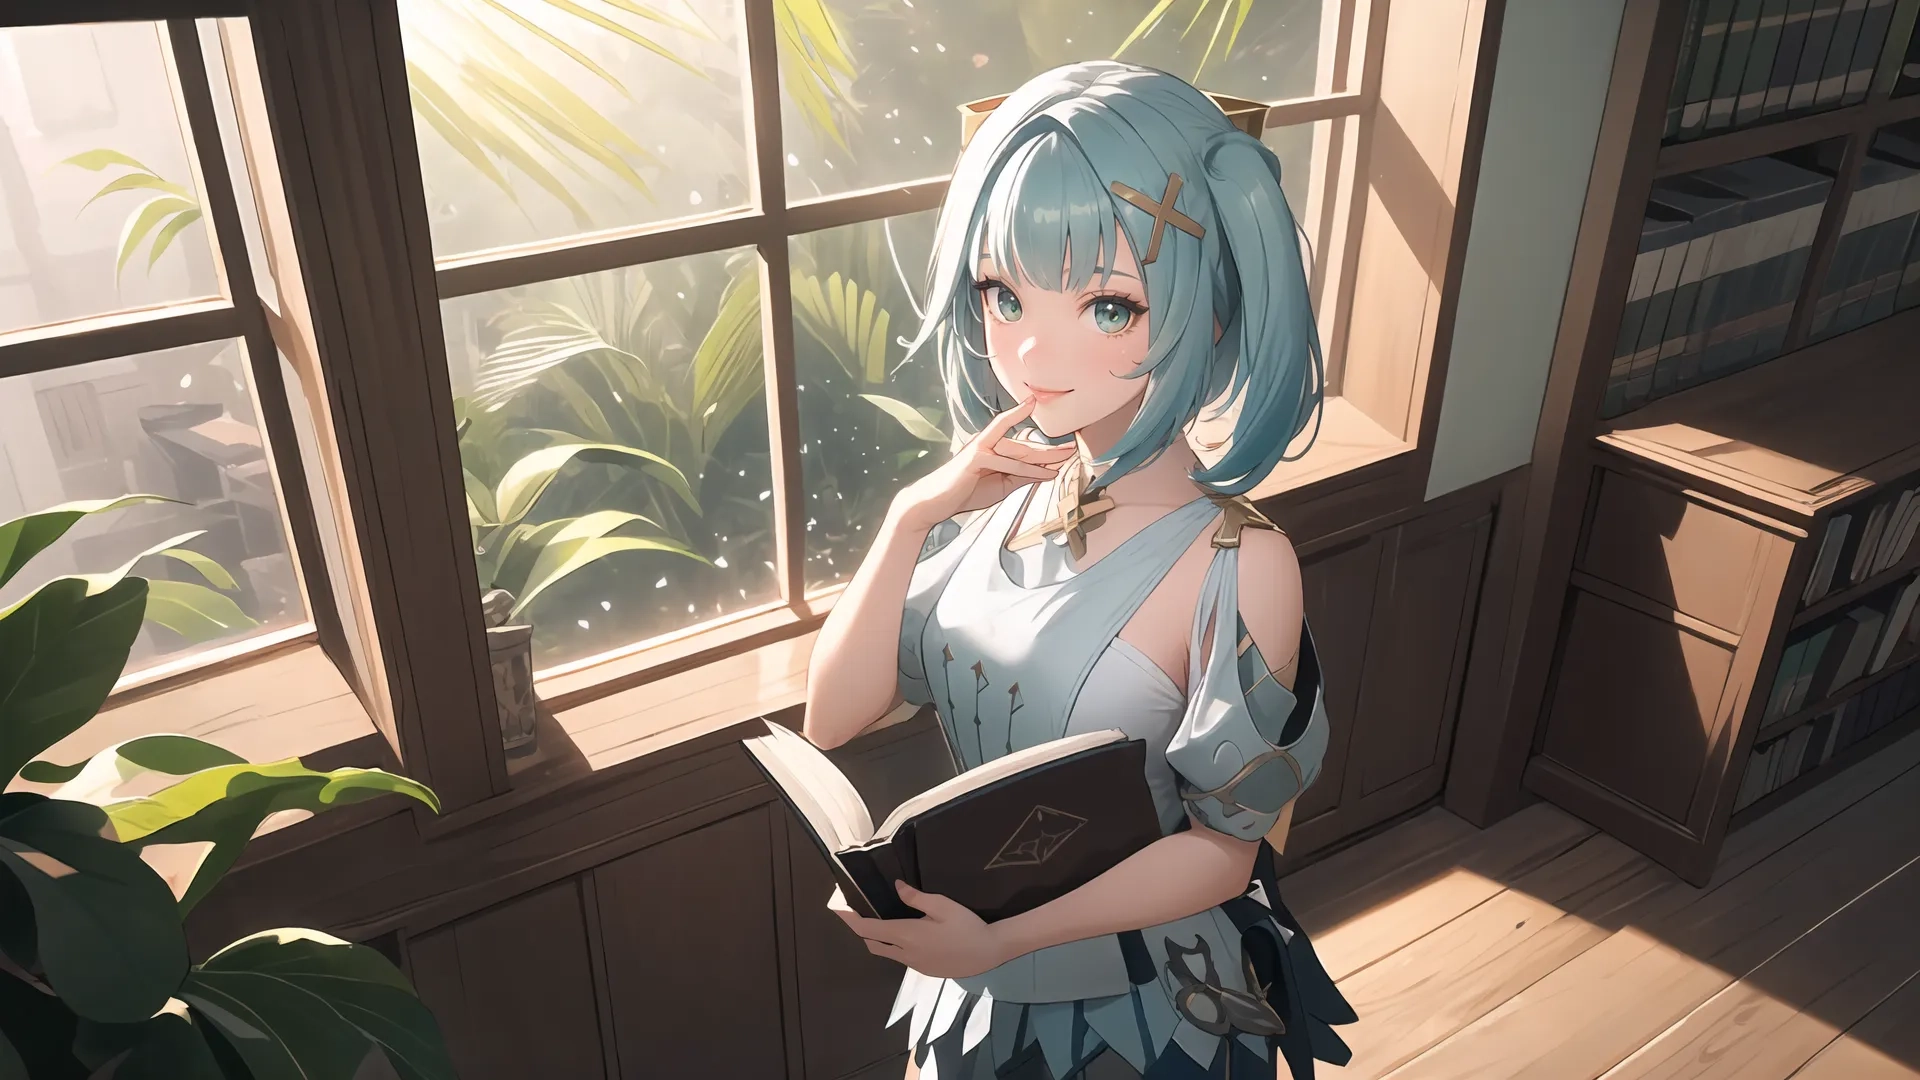 anime girl holding a book stands in front of the window with sunlight streaming through it and has light streaming through her blue hair wearing a blue outfit
